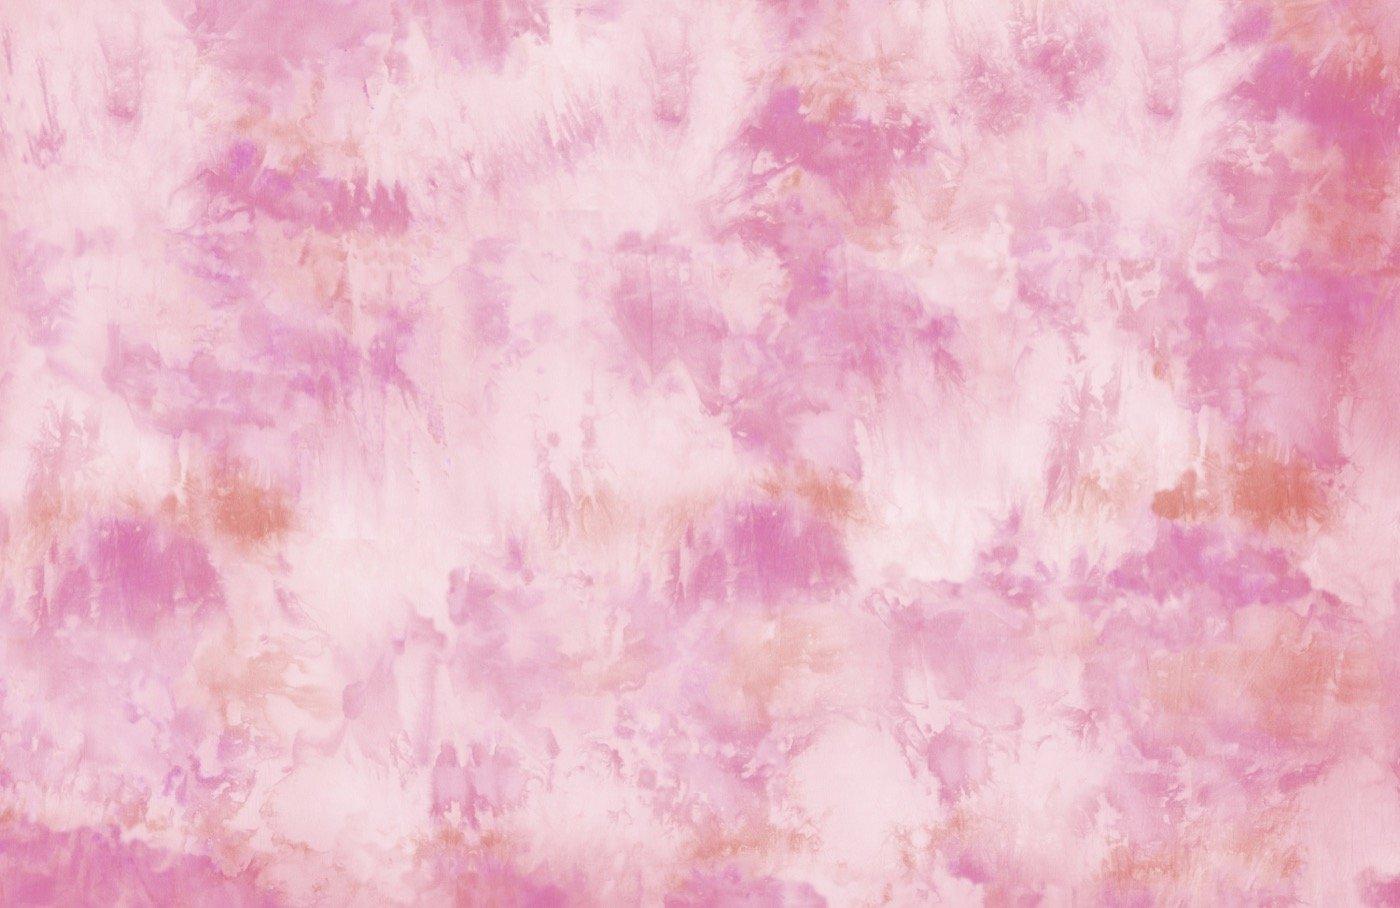 Tie Dye Background Images HD Pictures and Wallpaper For Free Download   Pngtree